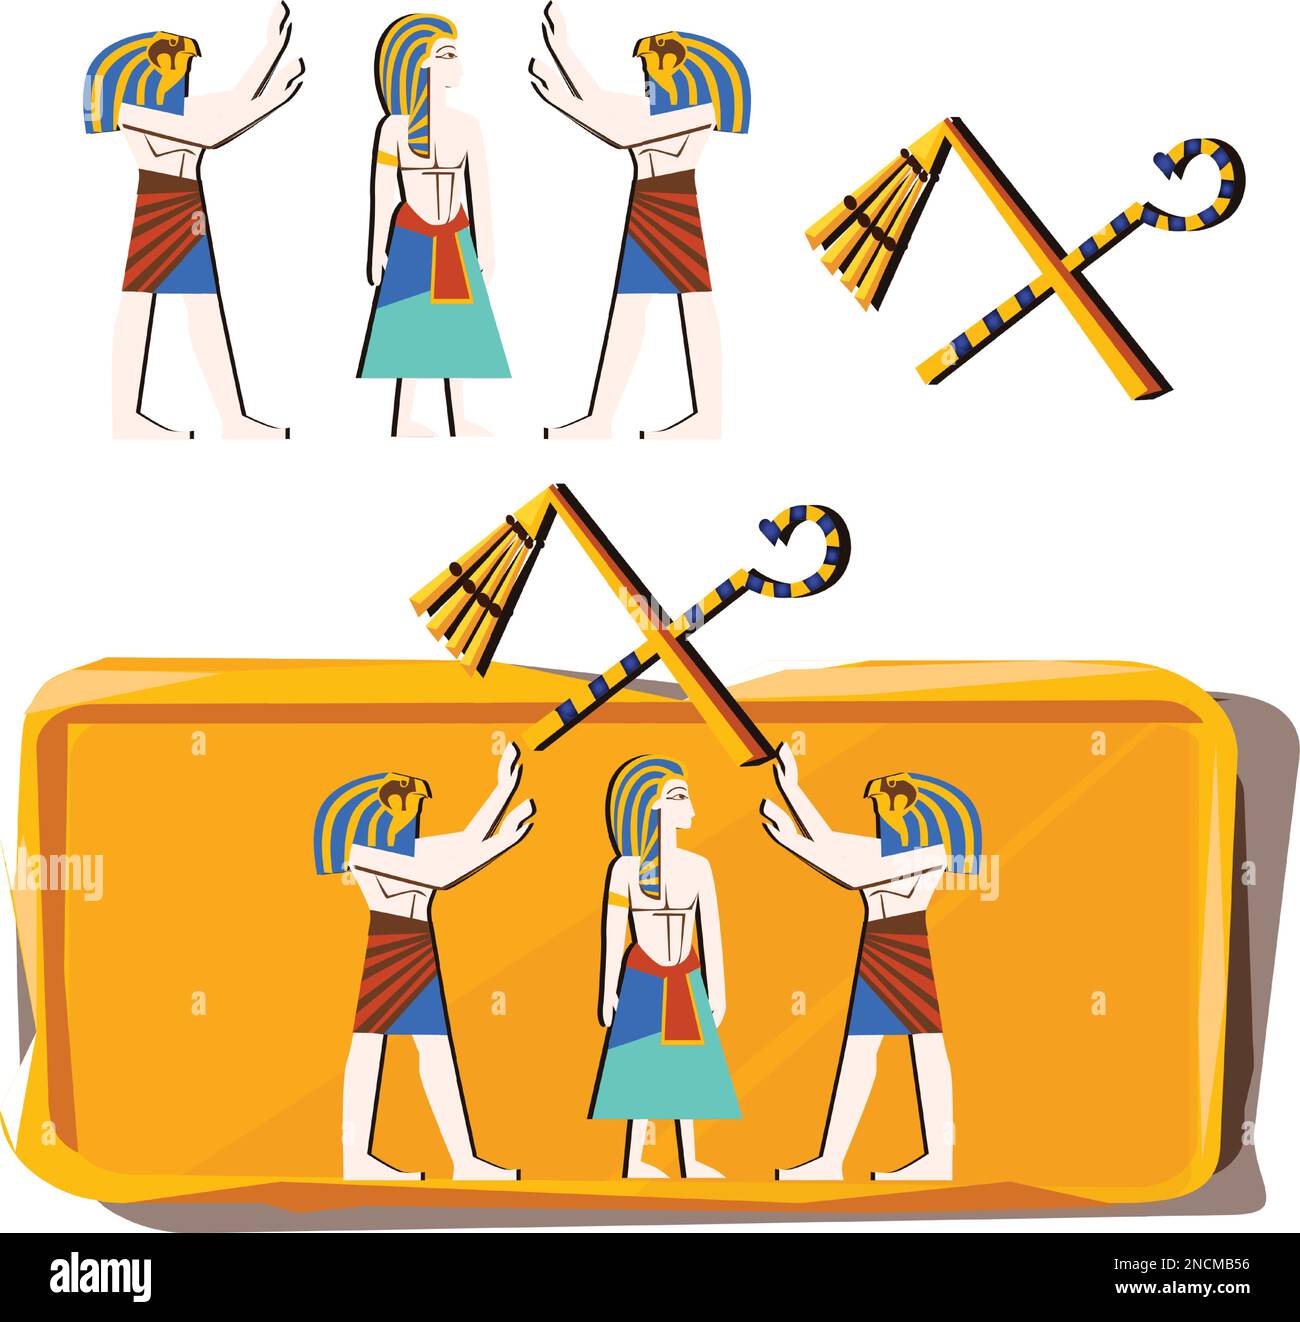 Stone board or clay tablet and Egyptian figures cartoons vector illustration. Wall art or mural element, monumental painting gods and human figures, sun god with bird head and pharaoh in nemes hat Stock Vector